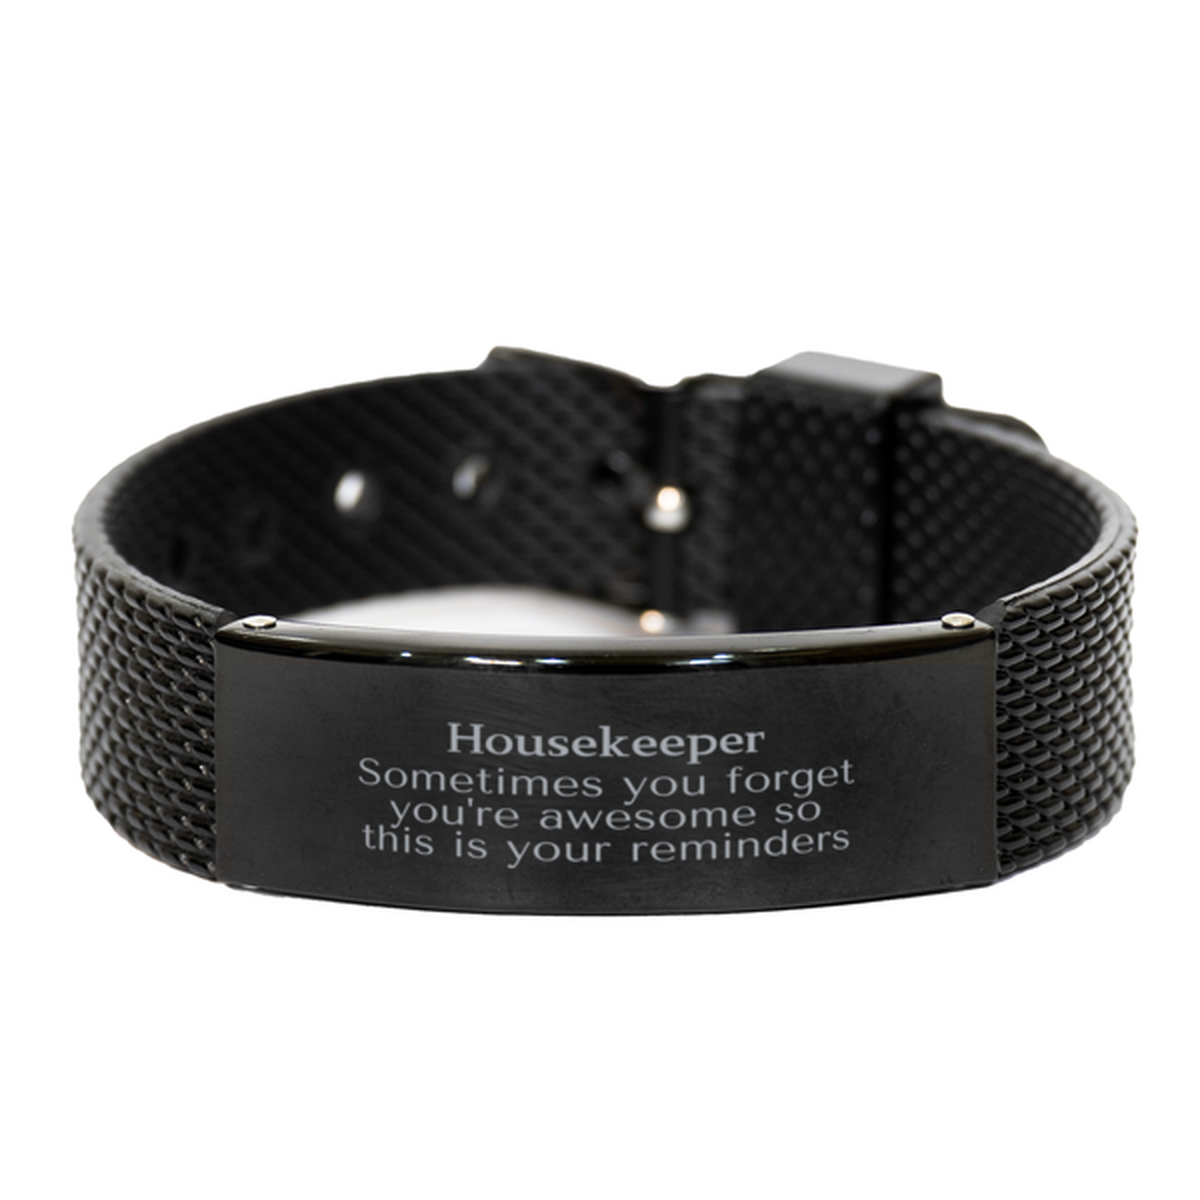 Sentimental Housekeeper Black Shark Mesh Bracelet, Housekeeper Sometimes you forget you're awesome so this is your reminders, Graduation Christmas Birthday Gifts for Housekeeper, Men, Women, Coworkers